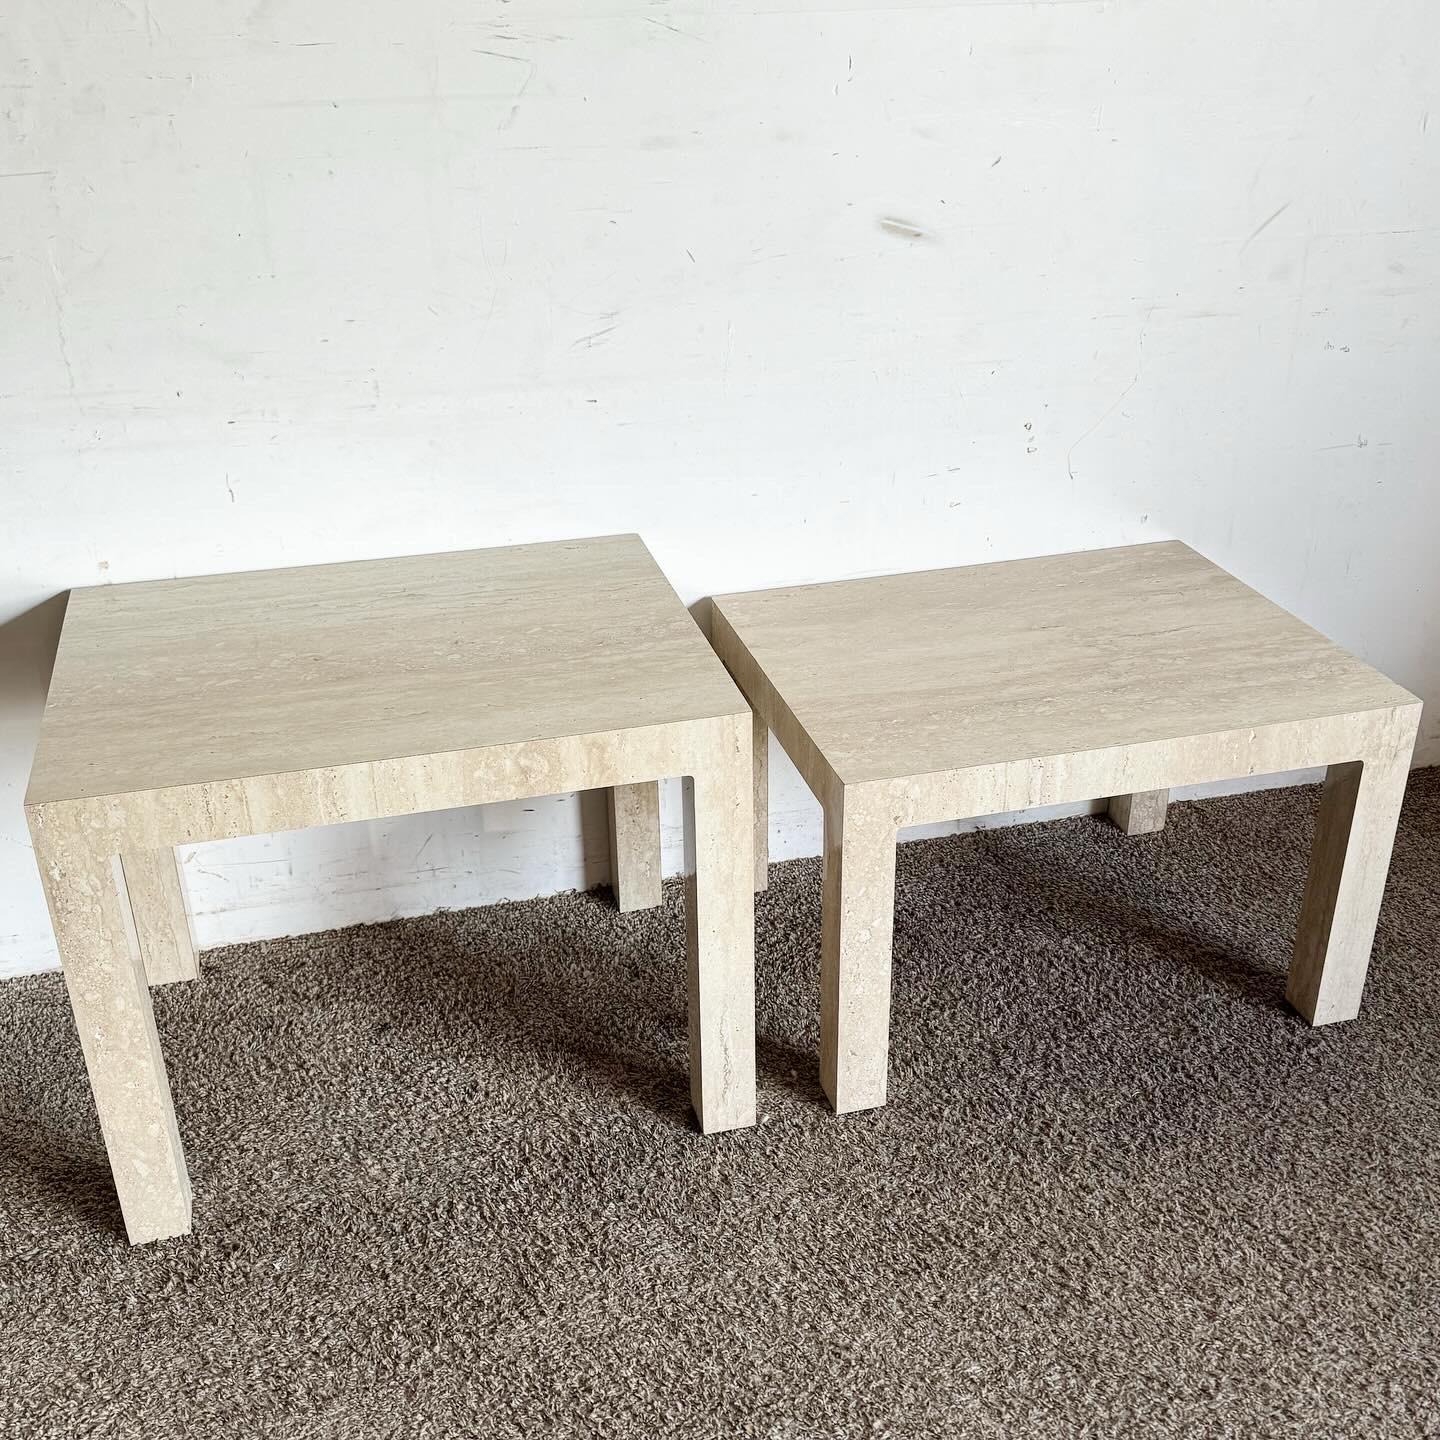 Discover the sophisticated charm of these Postmodern Faux Travertine Laminate Parsons Side Tables, available as a pair with heights of 22 inches and 18 inches, respectively. These tables embody the sleek, minimalist design of the Parsons style, with